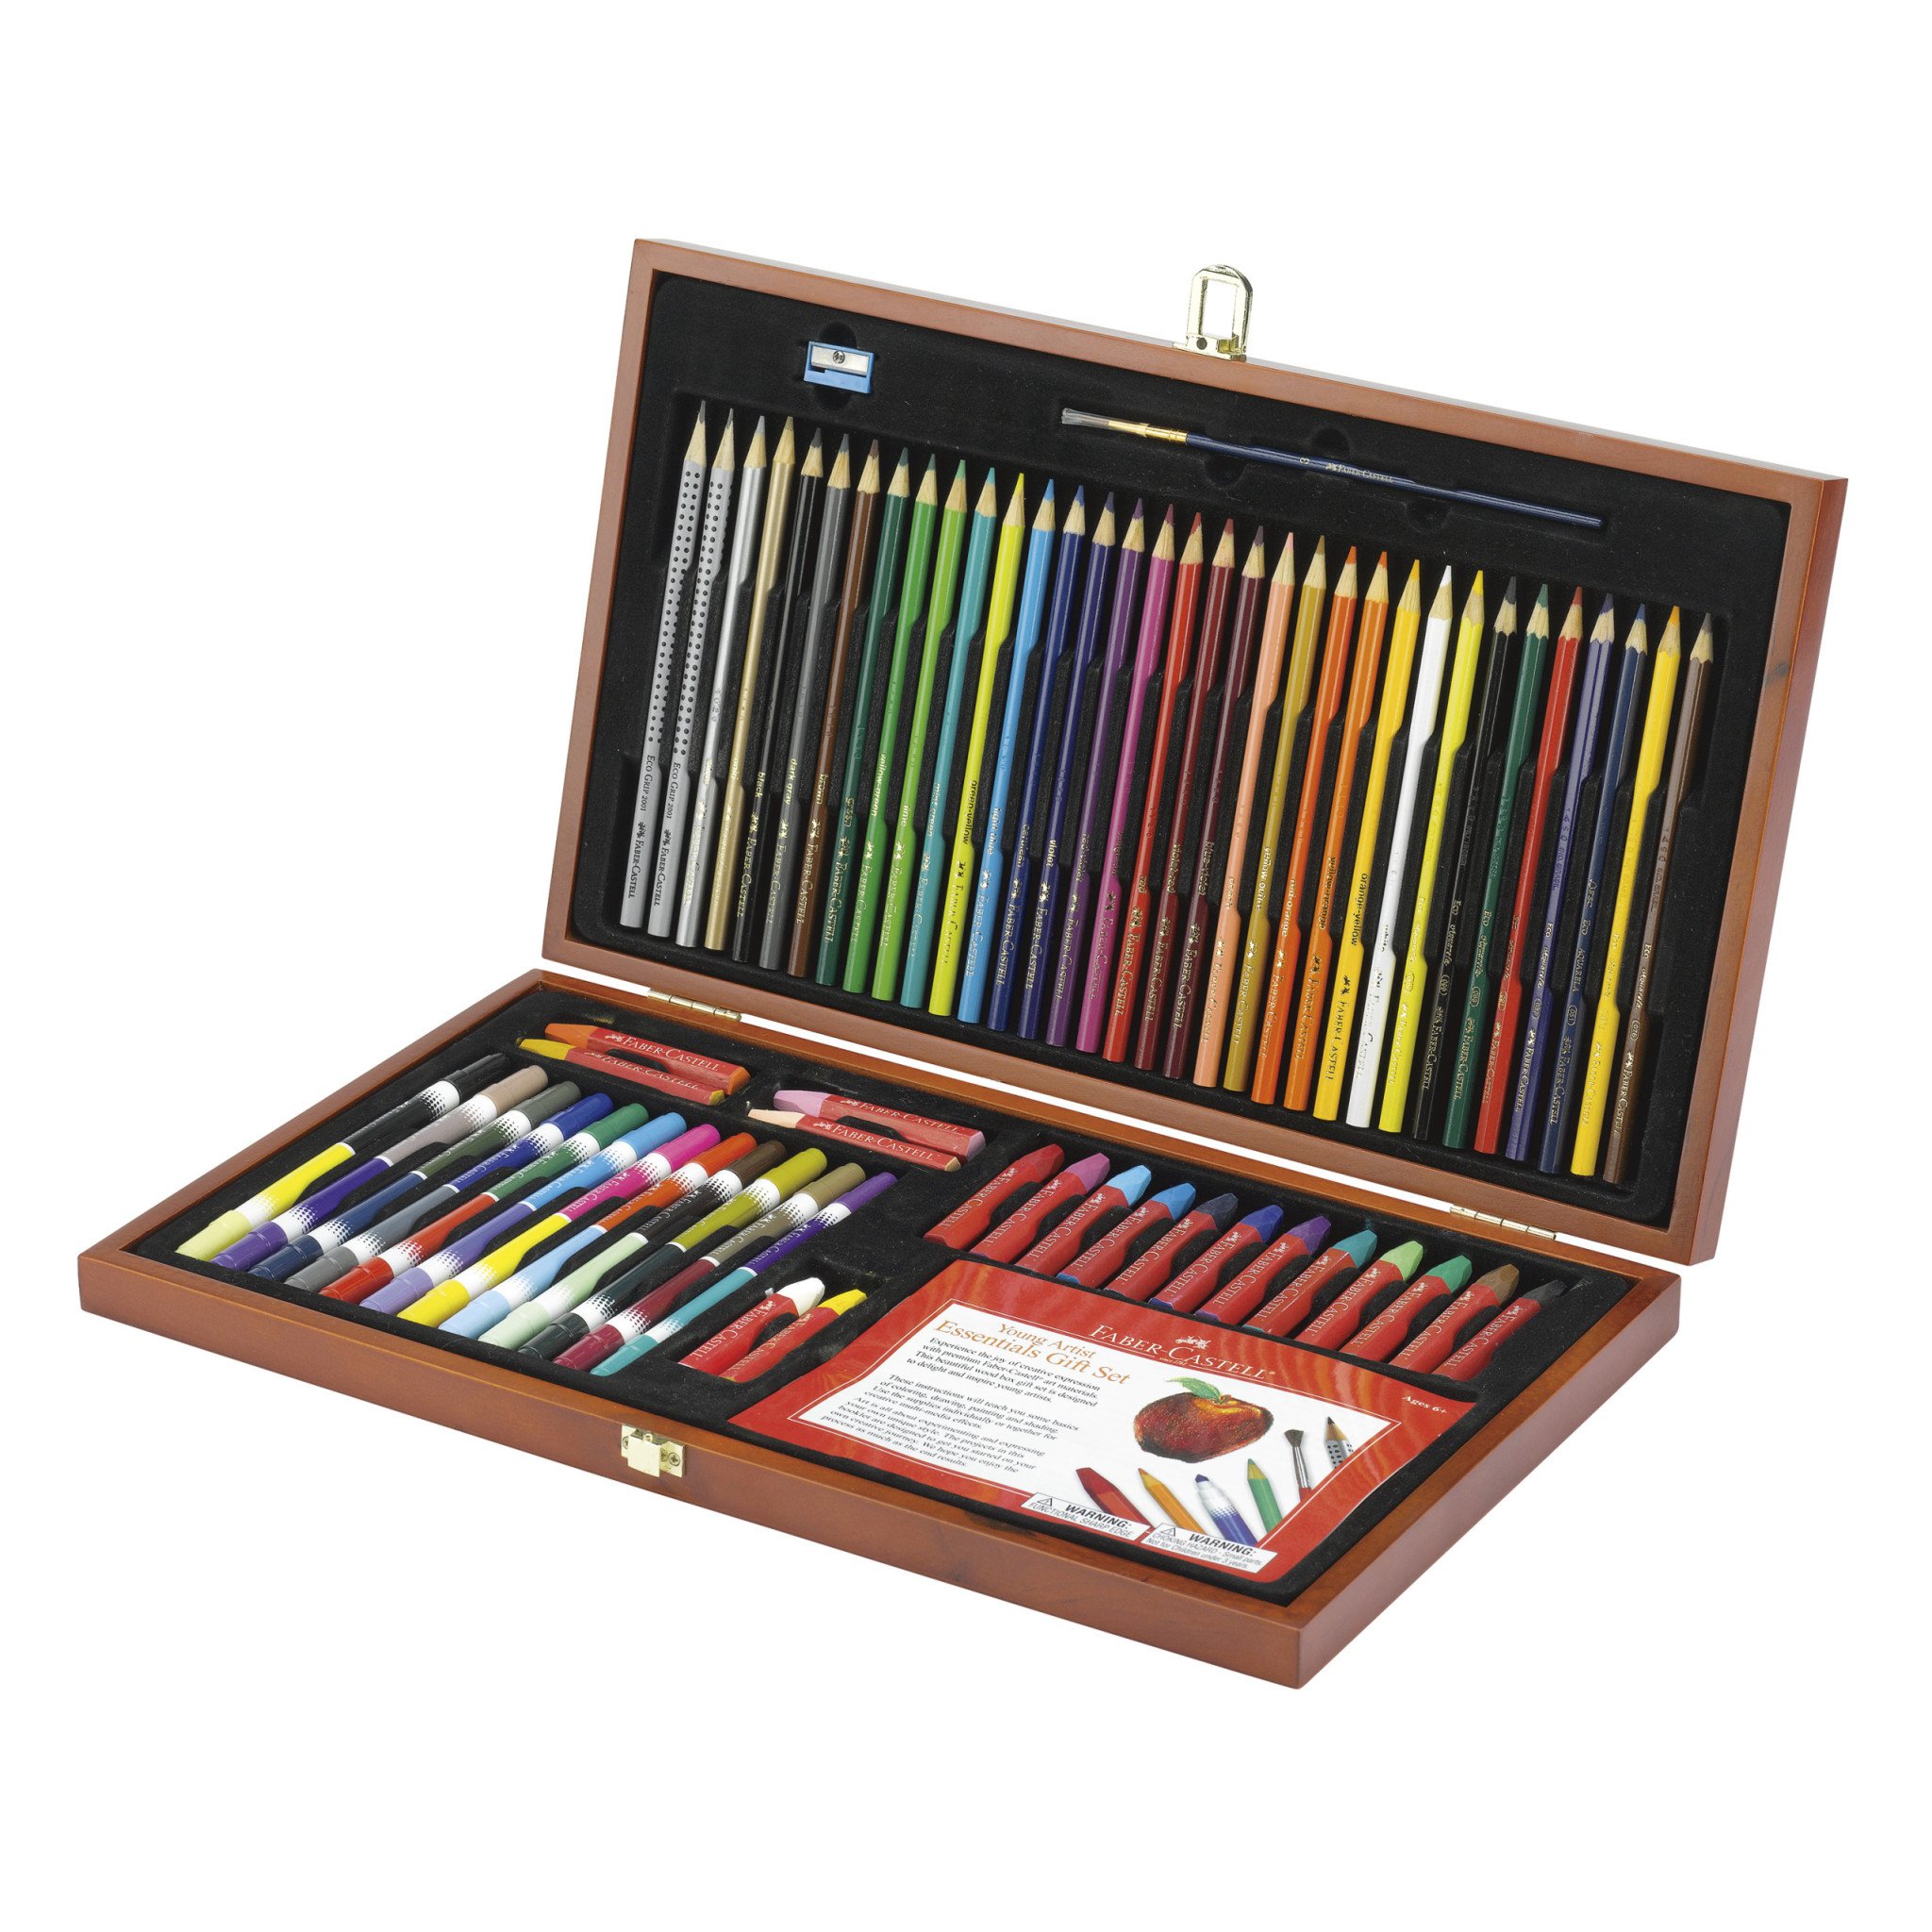 Young Artist Gift Set